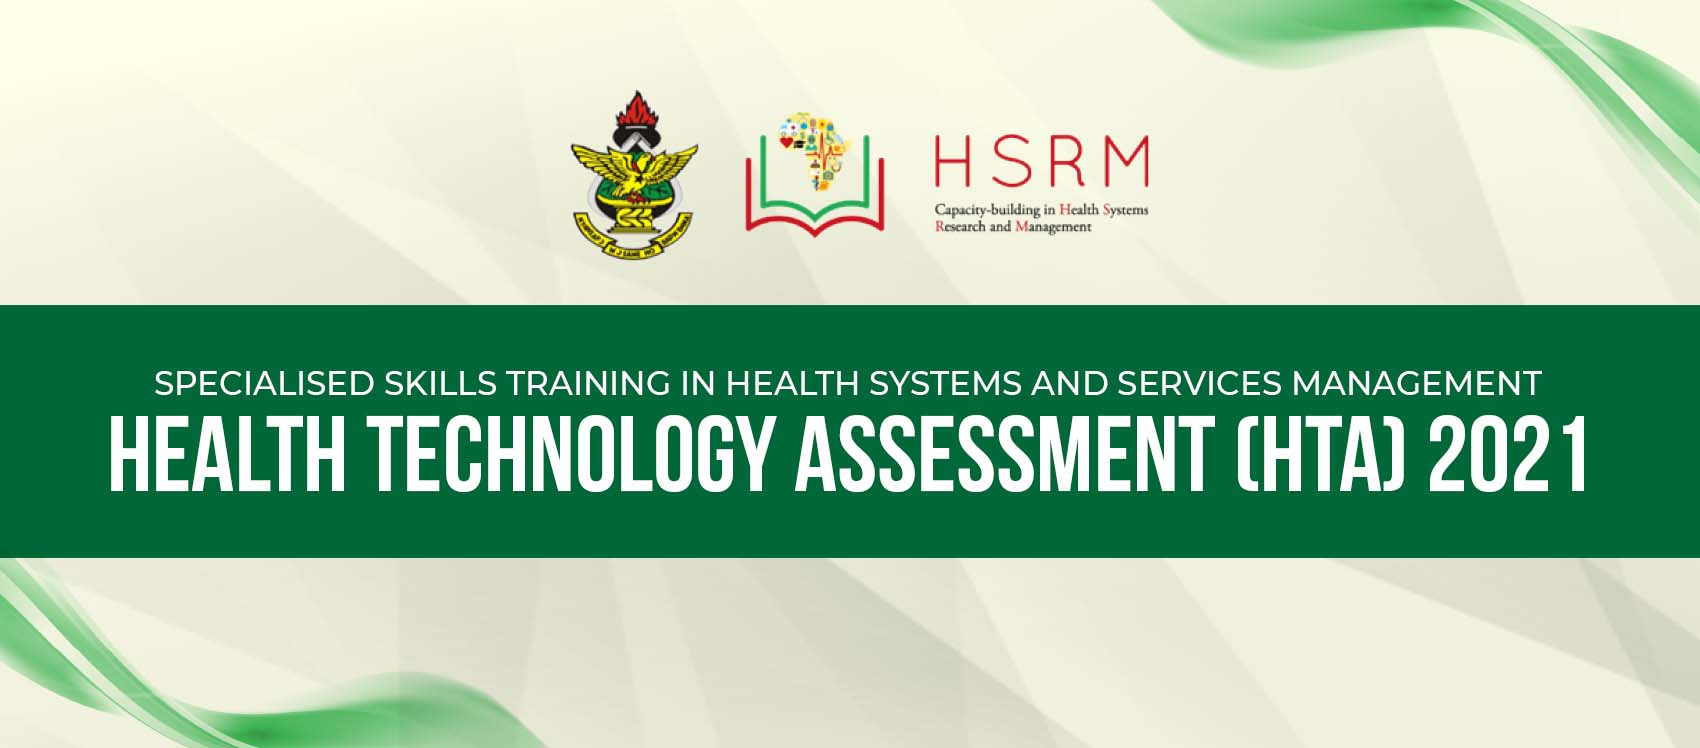 SPECIALISED SKILLS TRAINING IN HEALTH SYSTEMS AND SERVICES MANAGEMENT